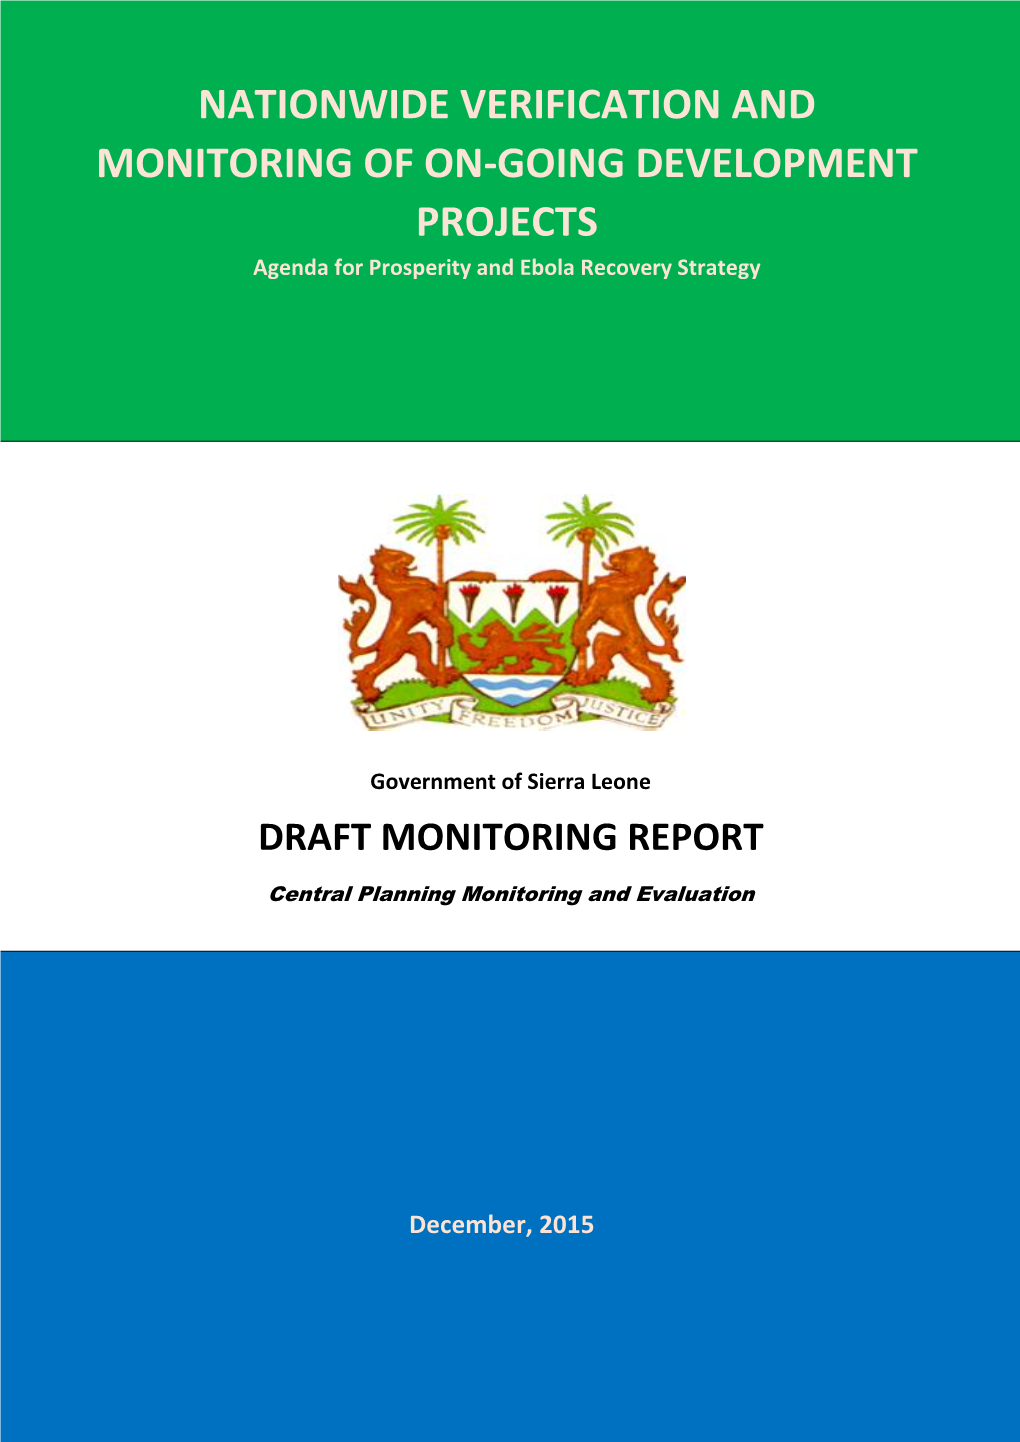 Nationwide Verification and Monitoring of On-Going Development Projects